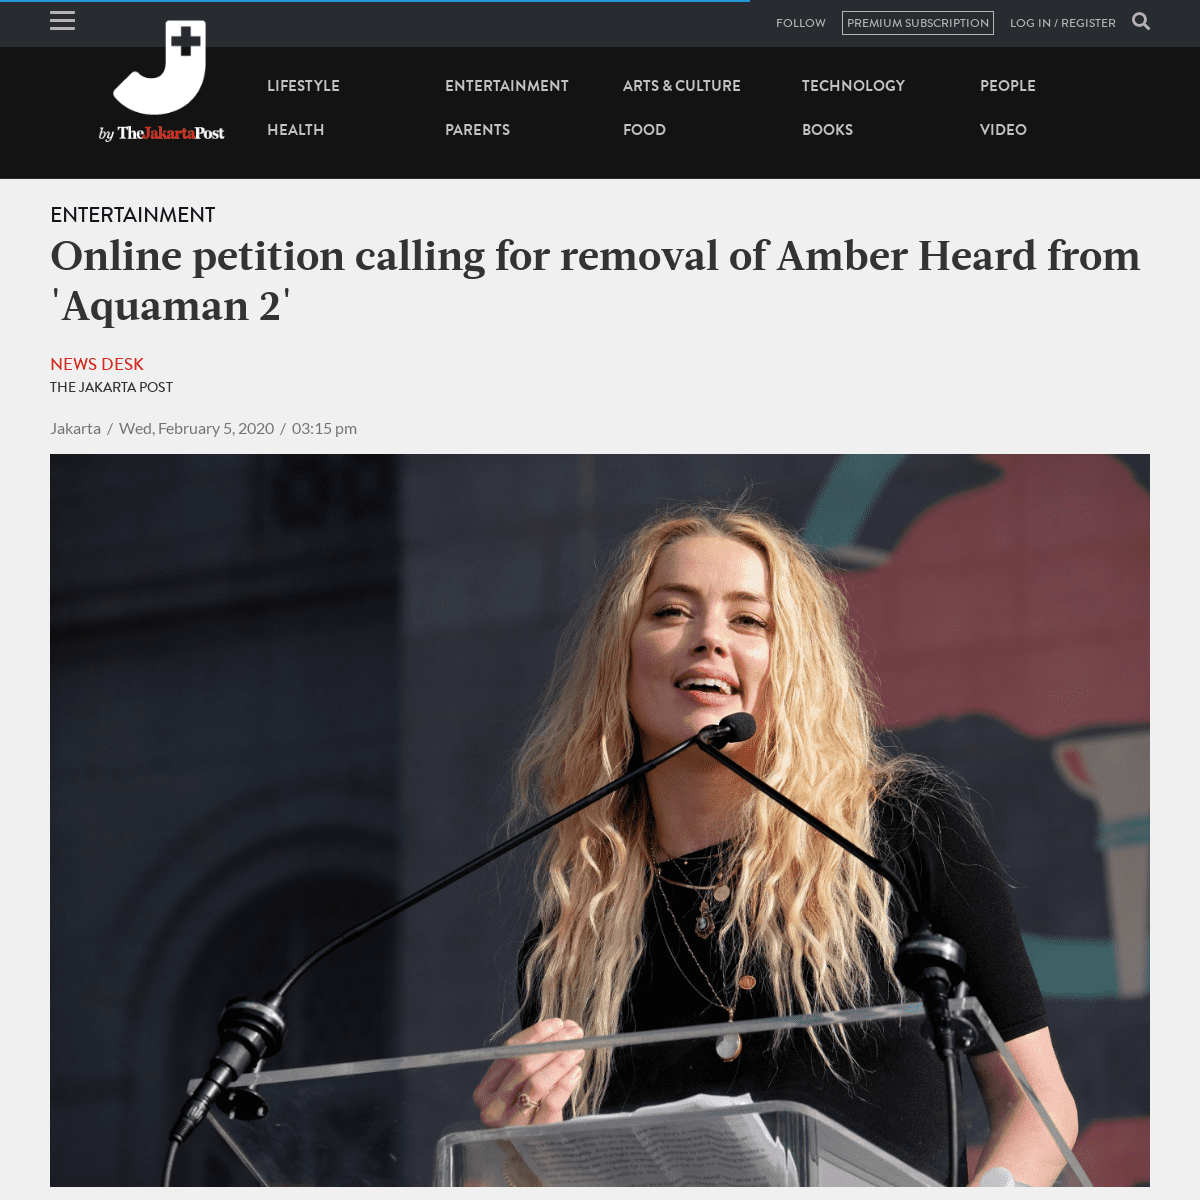 A complete backup of www.thejakartapost.com/life/2020/02/05/online-petition-calling-for-removal-of-amber-heard-from-aquaman-2.ht